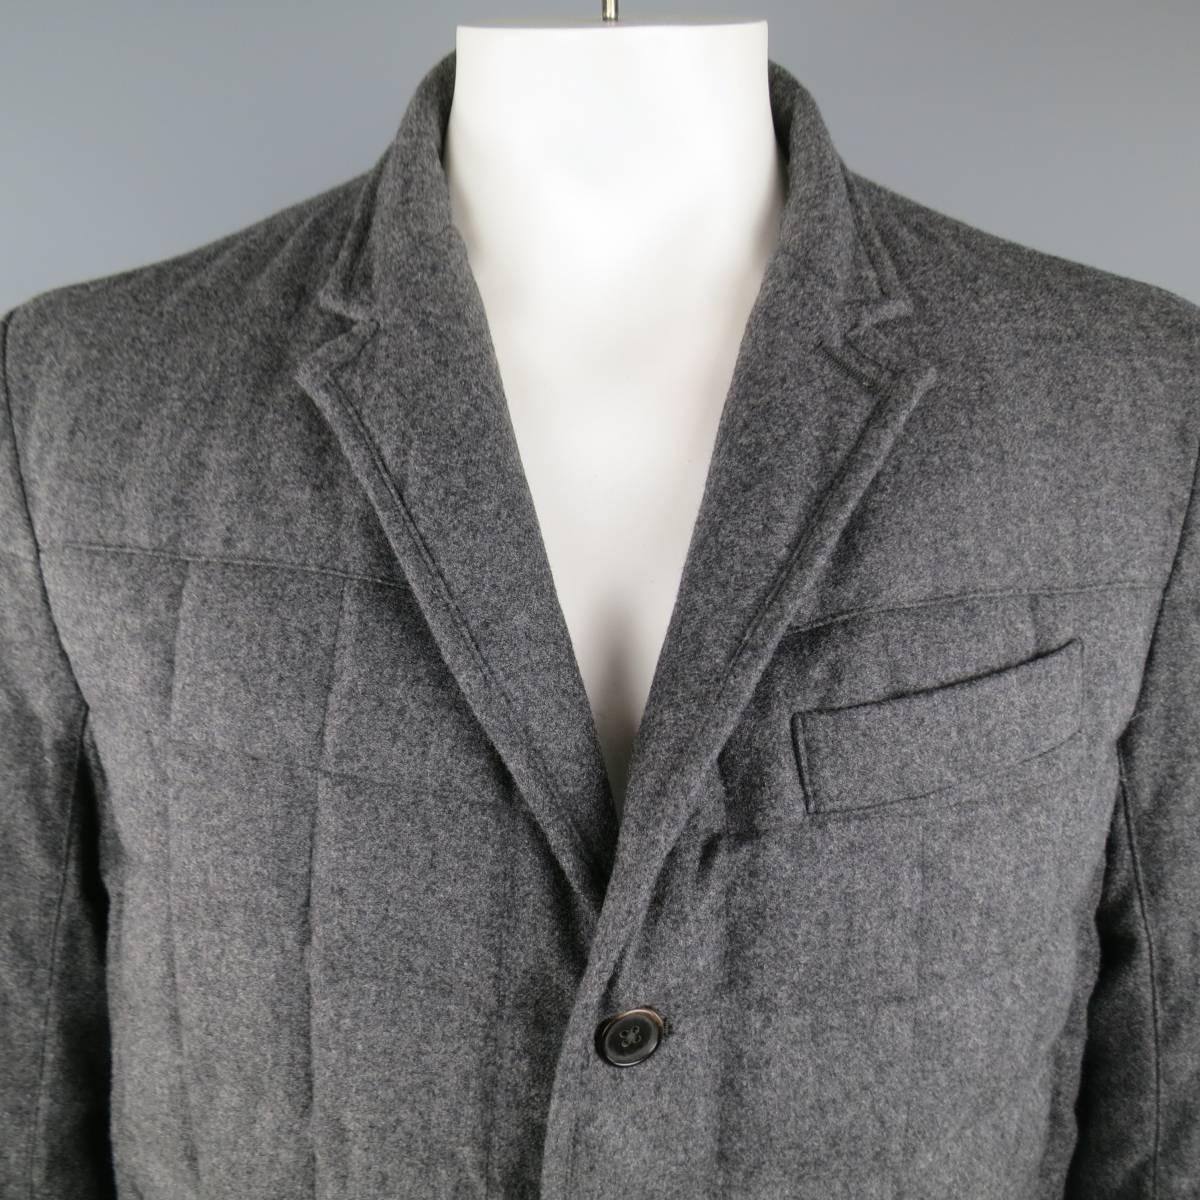 BLACK FLEECE by THOM BROWNE sport coat style jacket in a charcoal Heather gray quilted down filled wool featuring a notch lapel, three button closure, and triple flap pockets.
 
Excellent Pre-Owned Condition.
Marked: BB4
 
Measurements:
 
Shoulder: